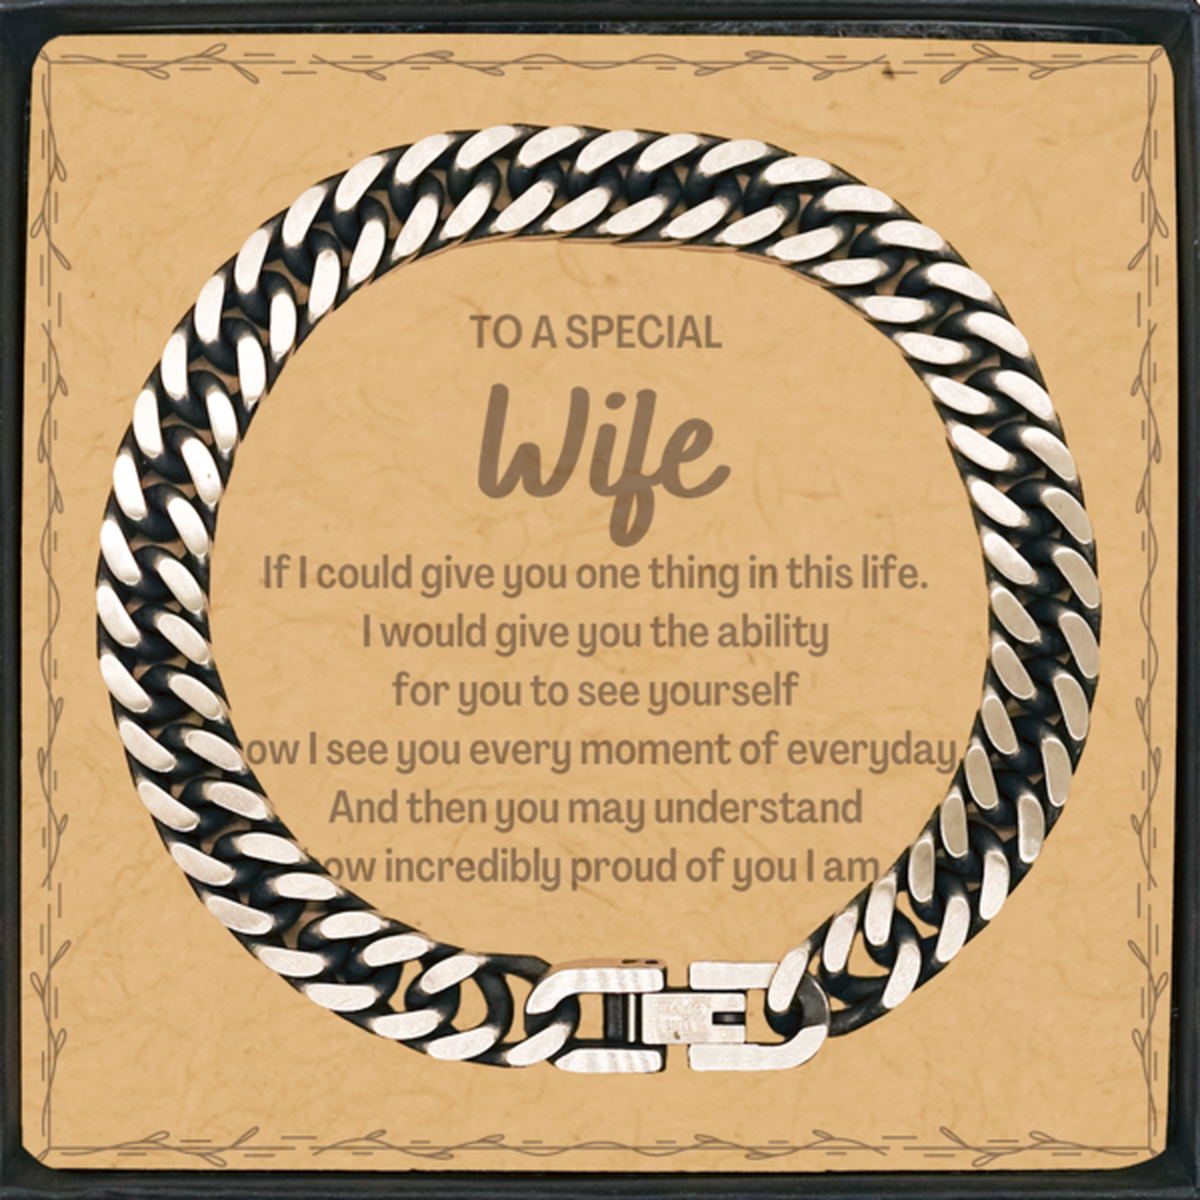 To My Wife Cuban Link Chain Bracelet, Gifts For Wife Message Card, Inspirational Gifts for Christmas Birthday, Epic Gifts for Wife To A Special Wife how incredibly proud of you I am